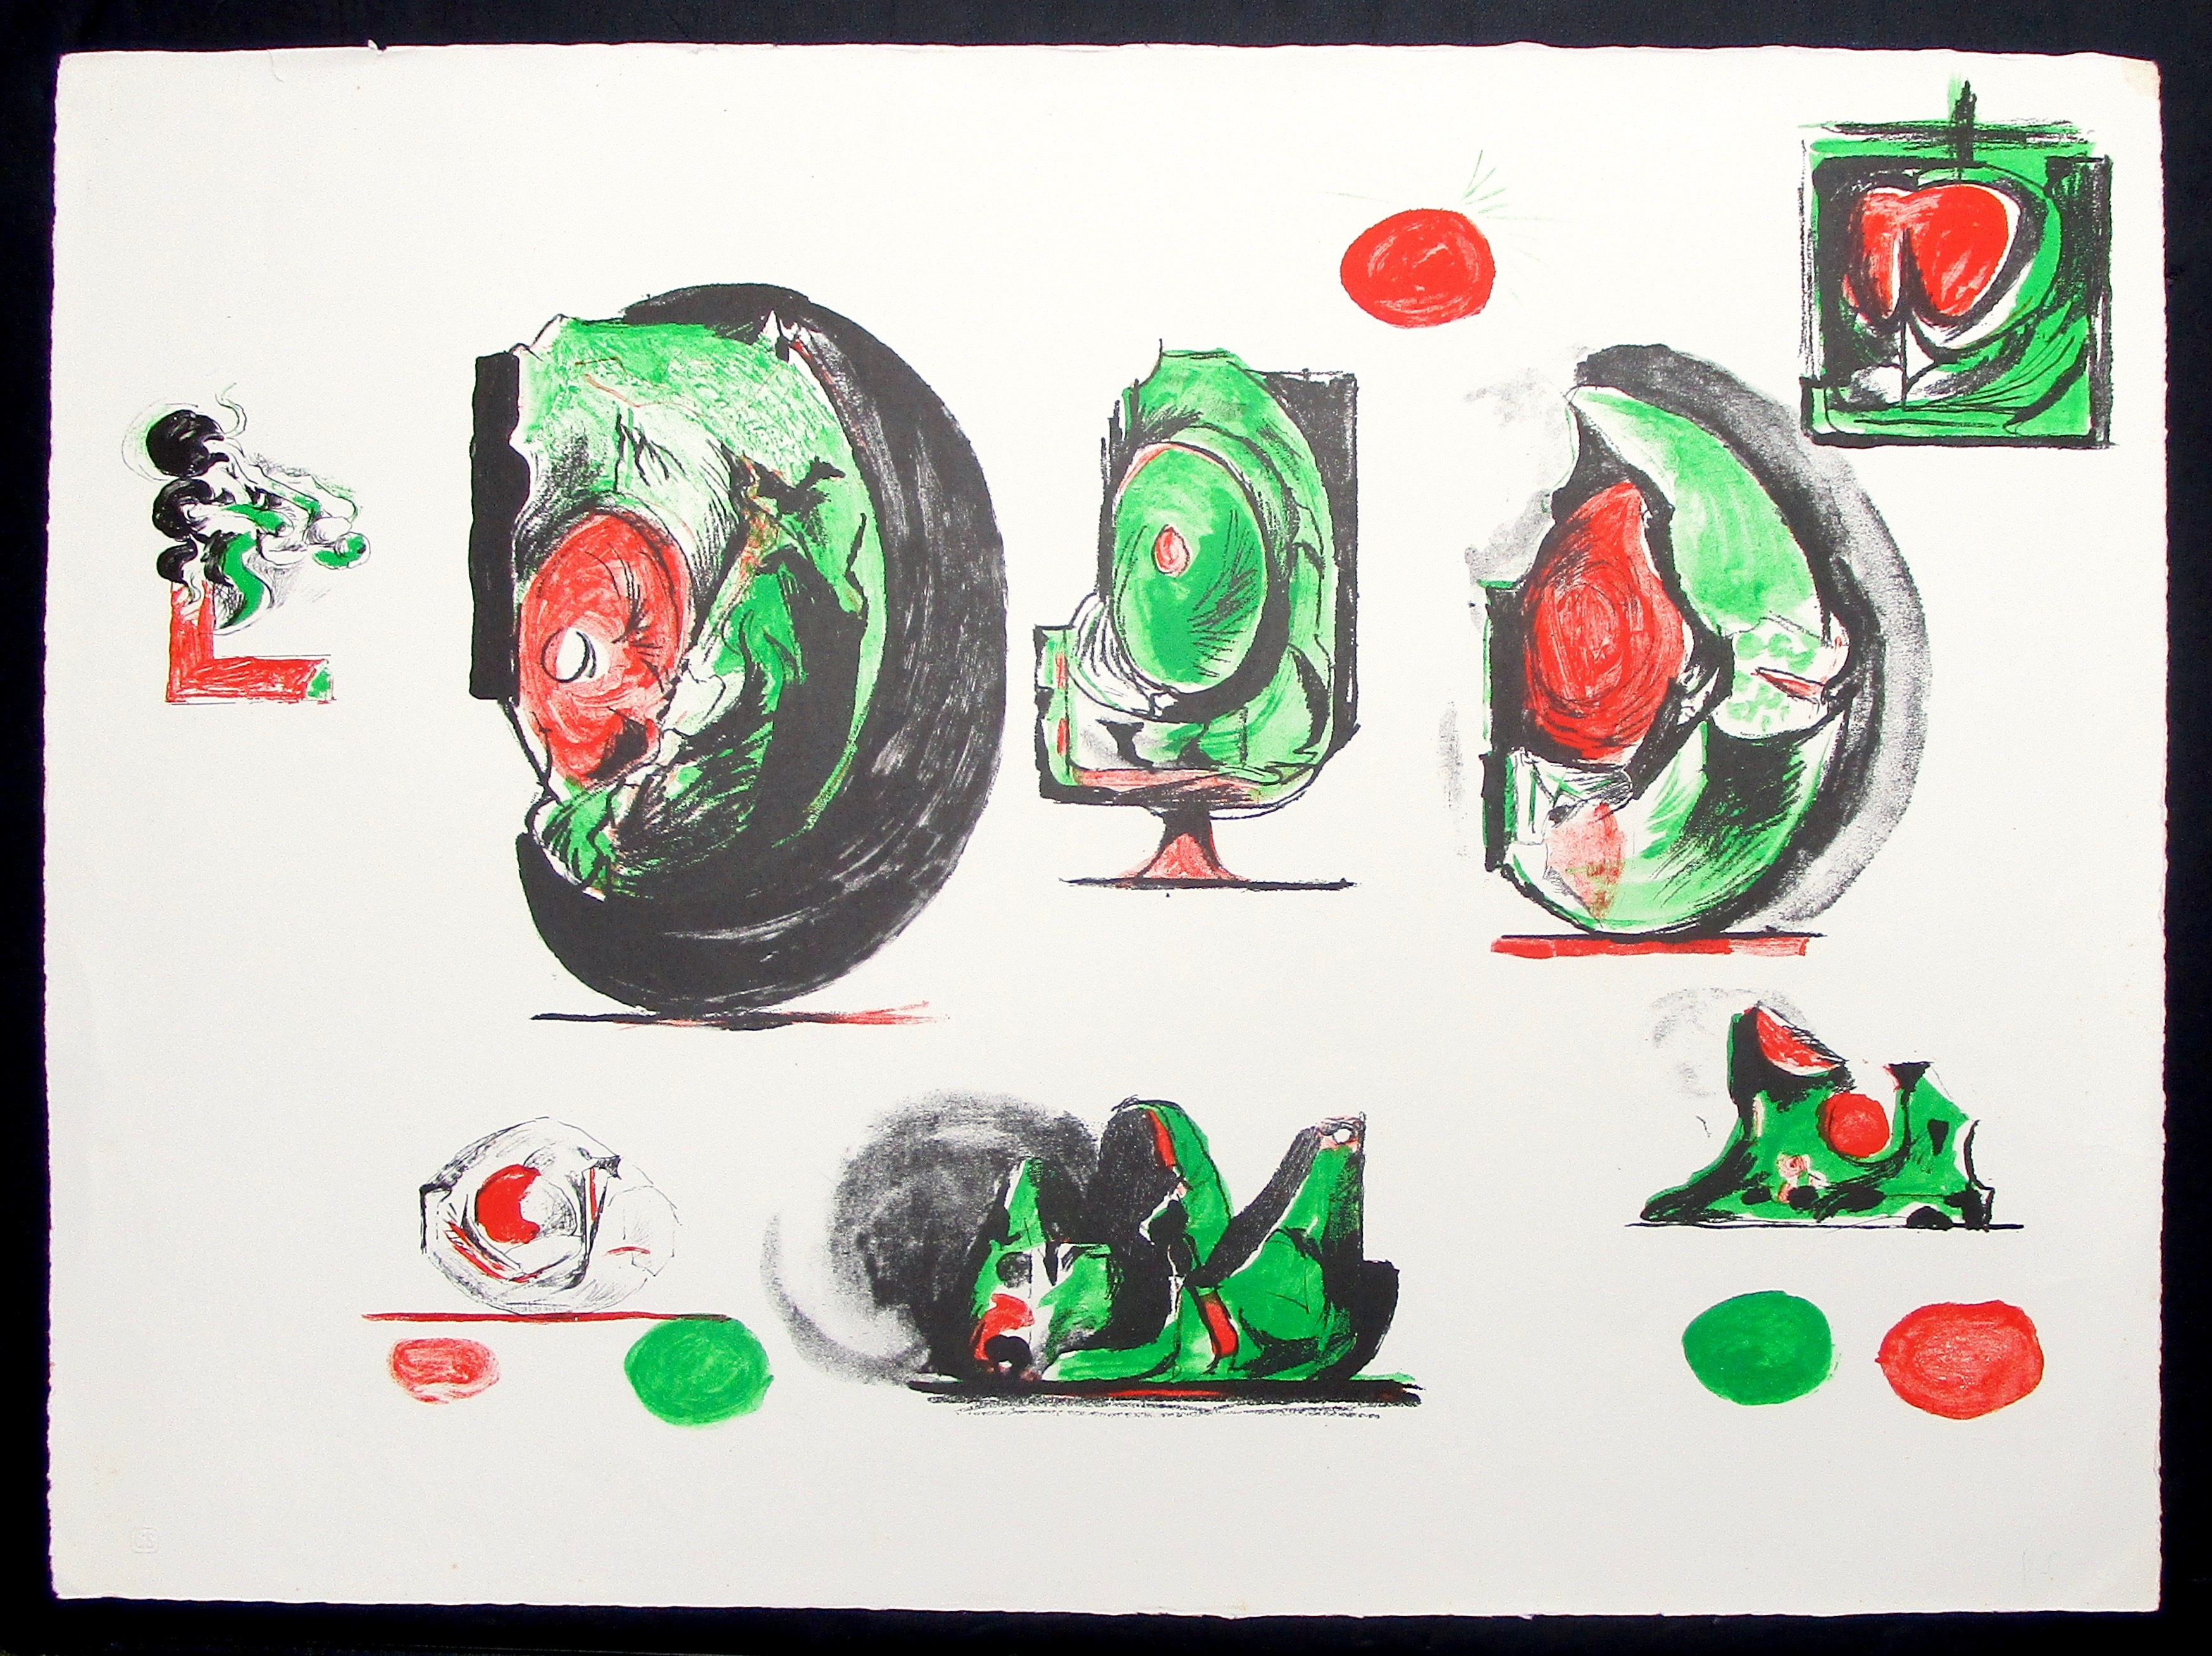 GRAHAM SUTHERLAND [1903-80]. Sheet of Studies, 1971. lithograph on wove paper, signed with